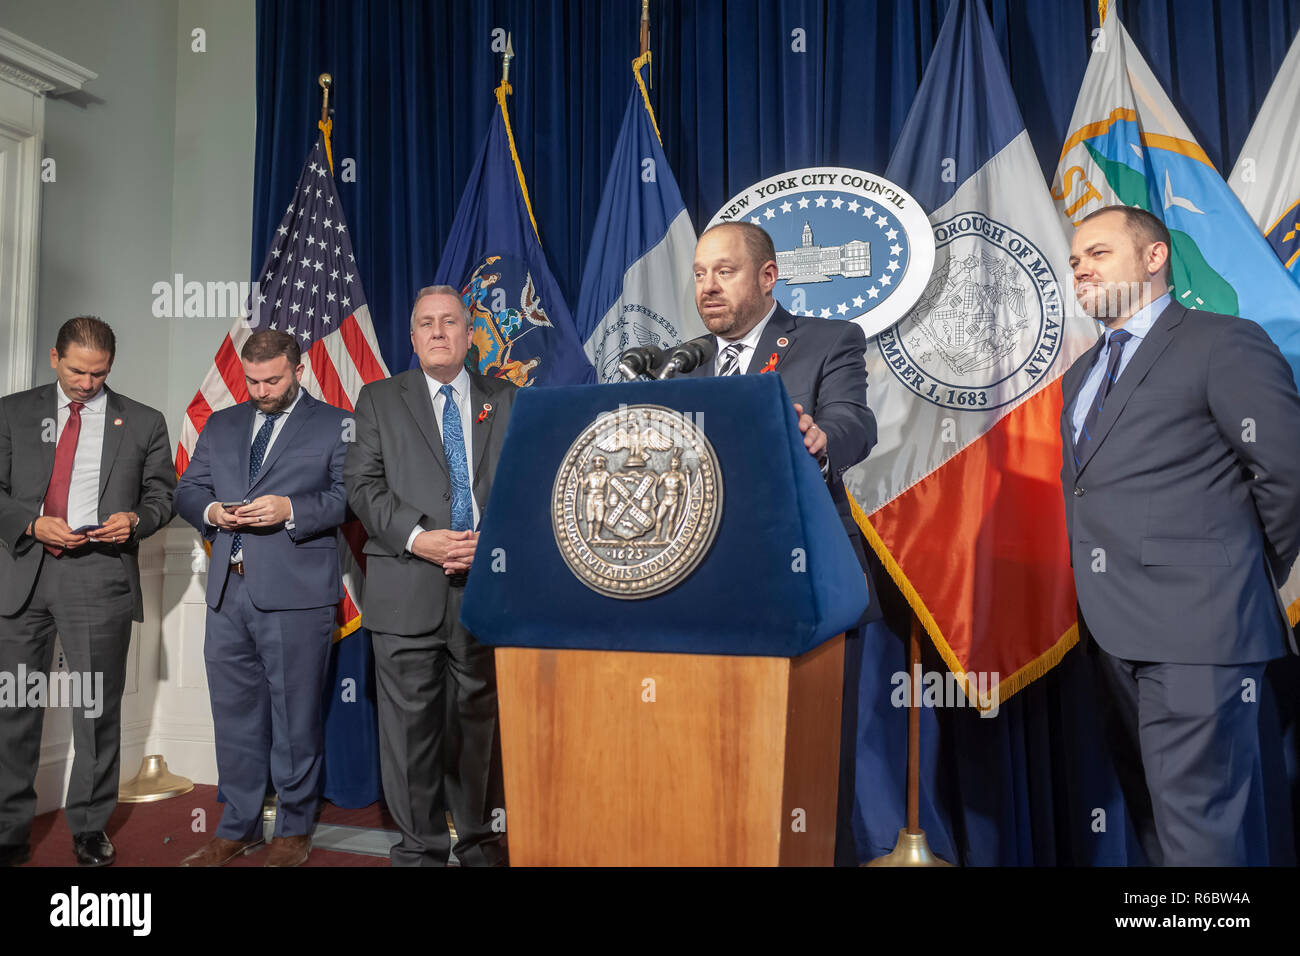 (Left to right) New York City Council Members Fernando Cabrera, Joseph C. Borelli, Daniel Dromm, Rory Lancman and New York City Council Speaker Corey Johnson at a news conference  on Wednesday, November 28, 2018 in the Red Room of New York City Hall about pending legislation. The council's vote on expanding voter protection services for incarcerated individuals was discussed among a multitude of other bills.  (Â© Richard B. Levine) Stock Photo